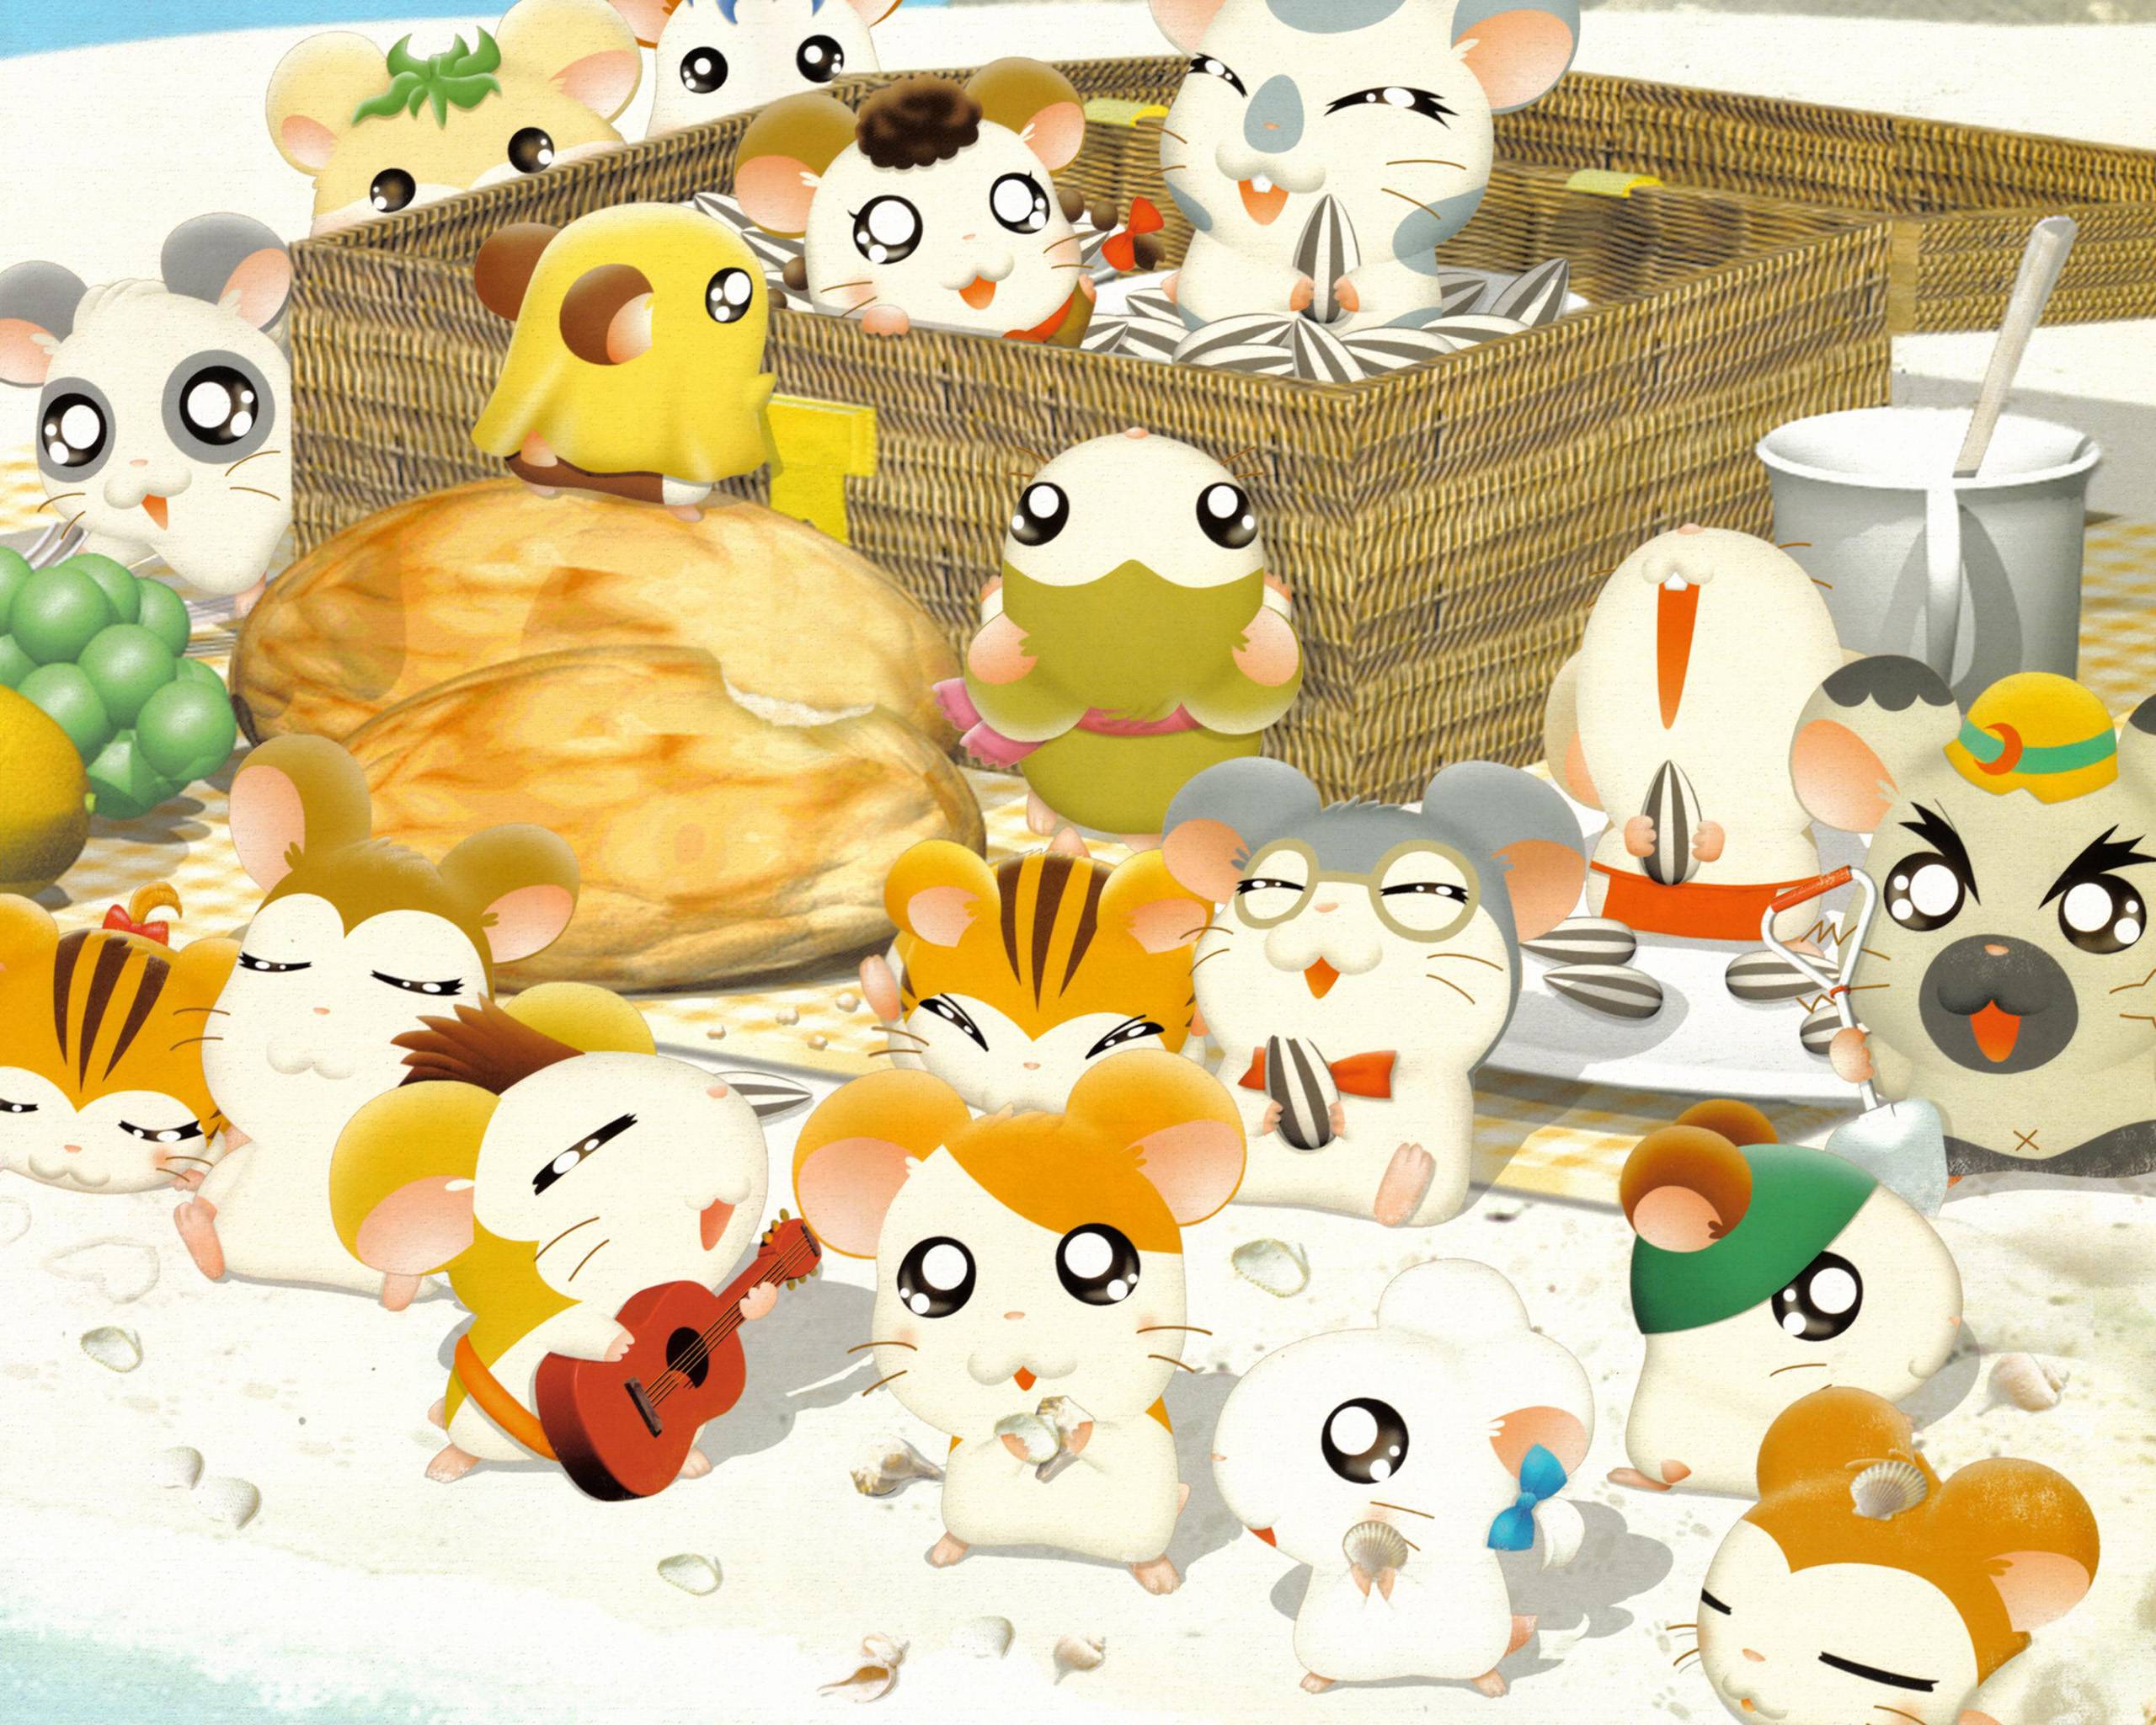 Hamtaro is now on Anime Wallpaper Site check it. Anime